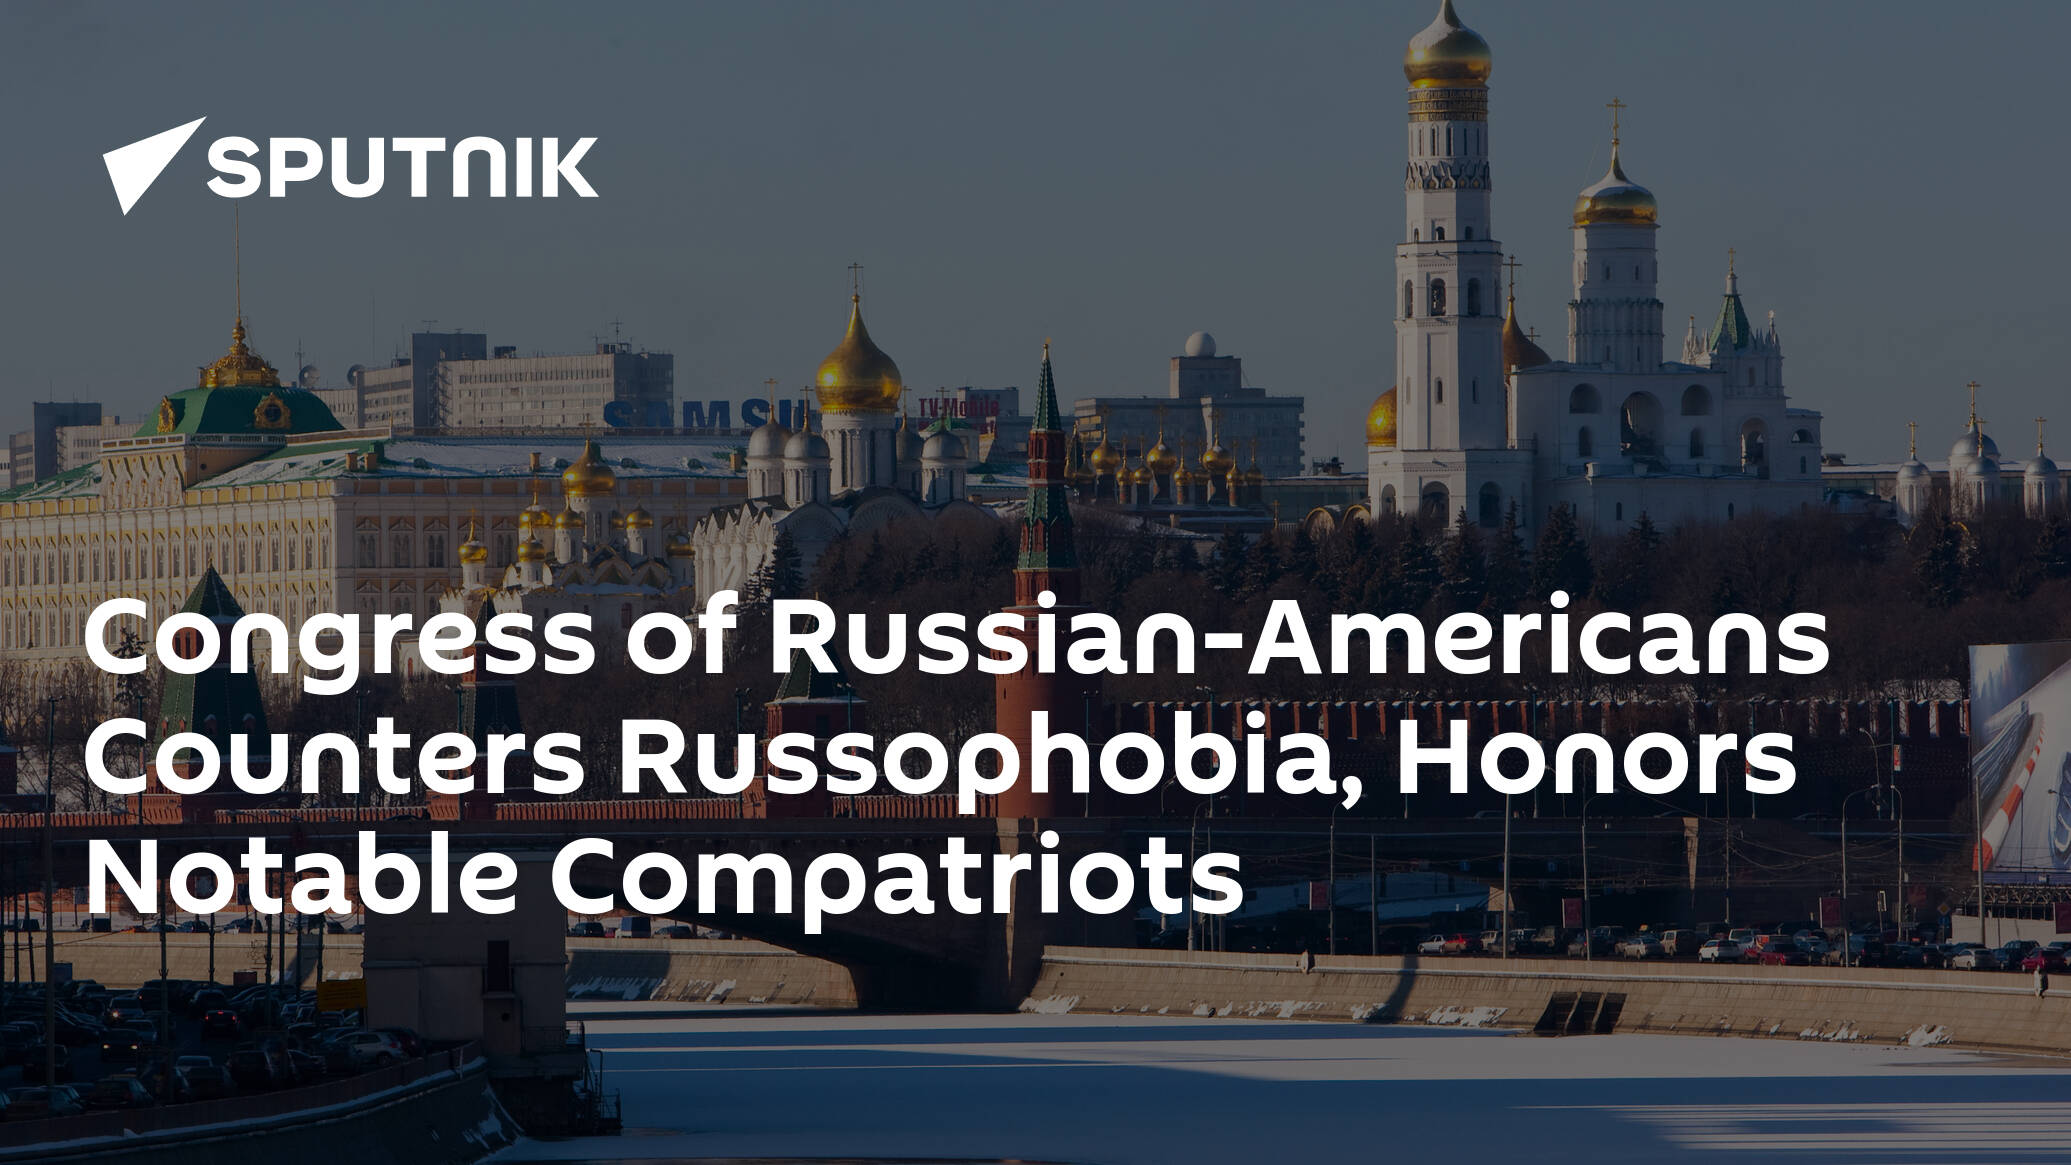 Congress of Russian-Americans Counters Russophobia, Honors Notable Compatriots